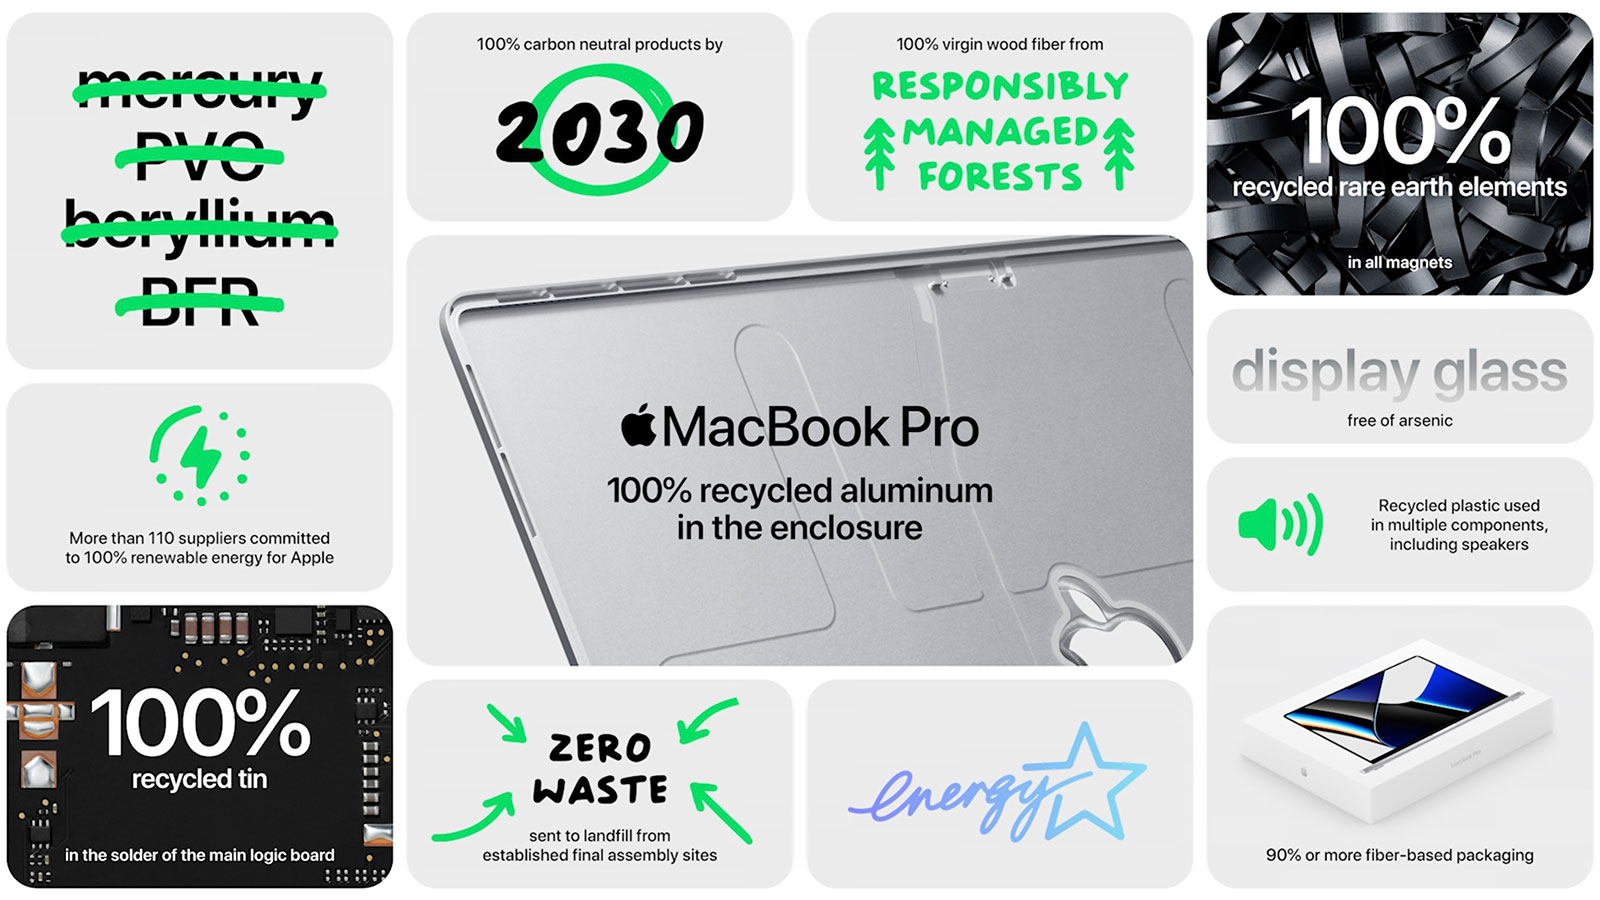 MacBook Pro 2021 environment overview